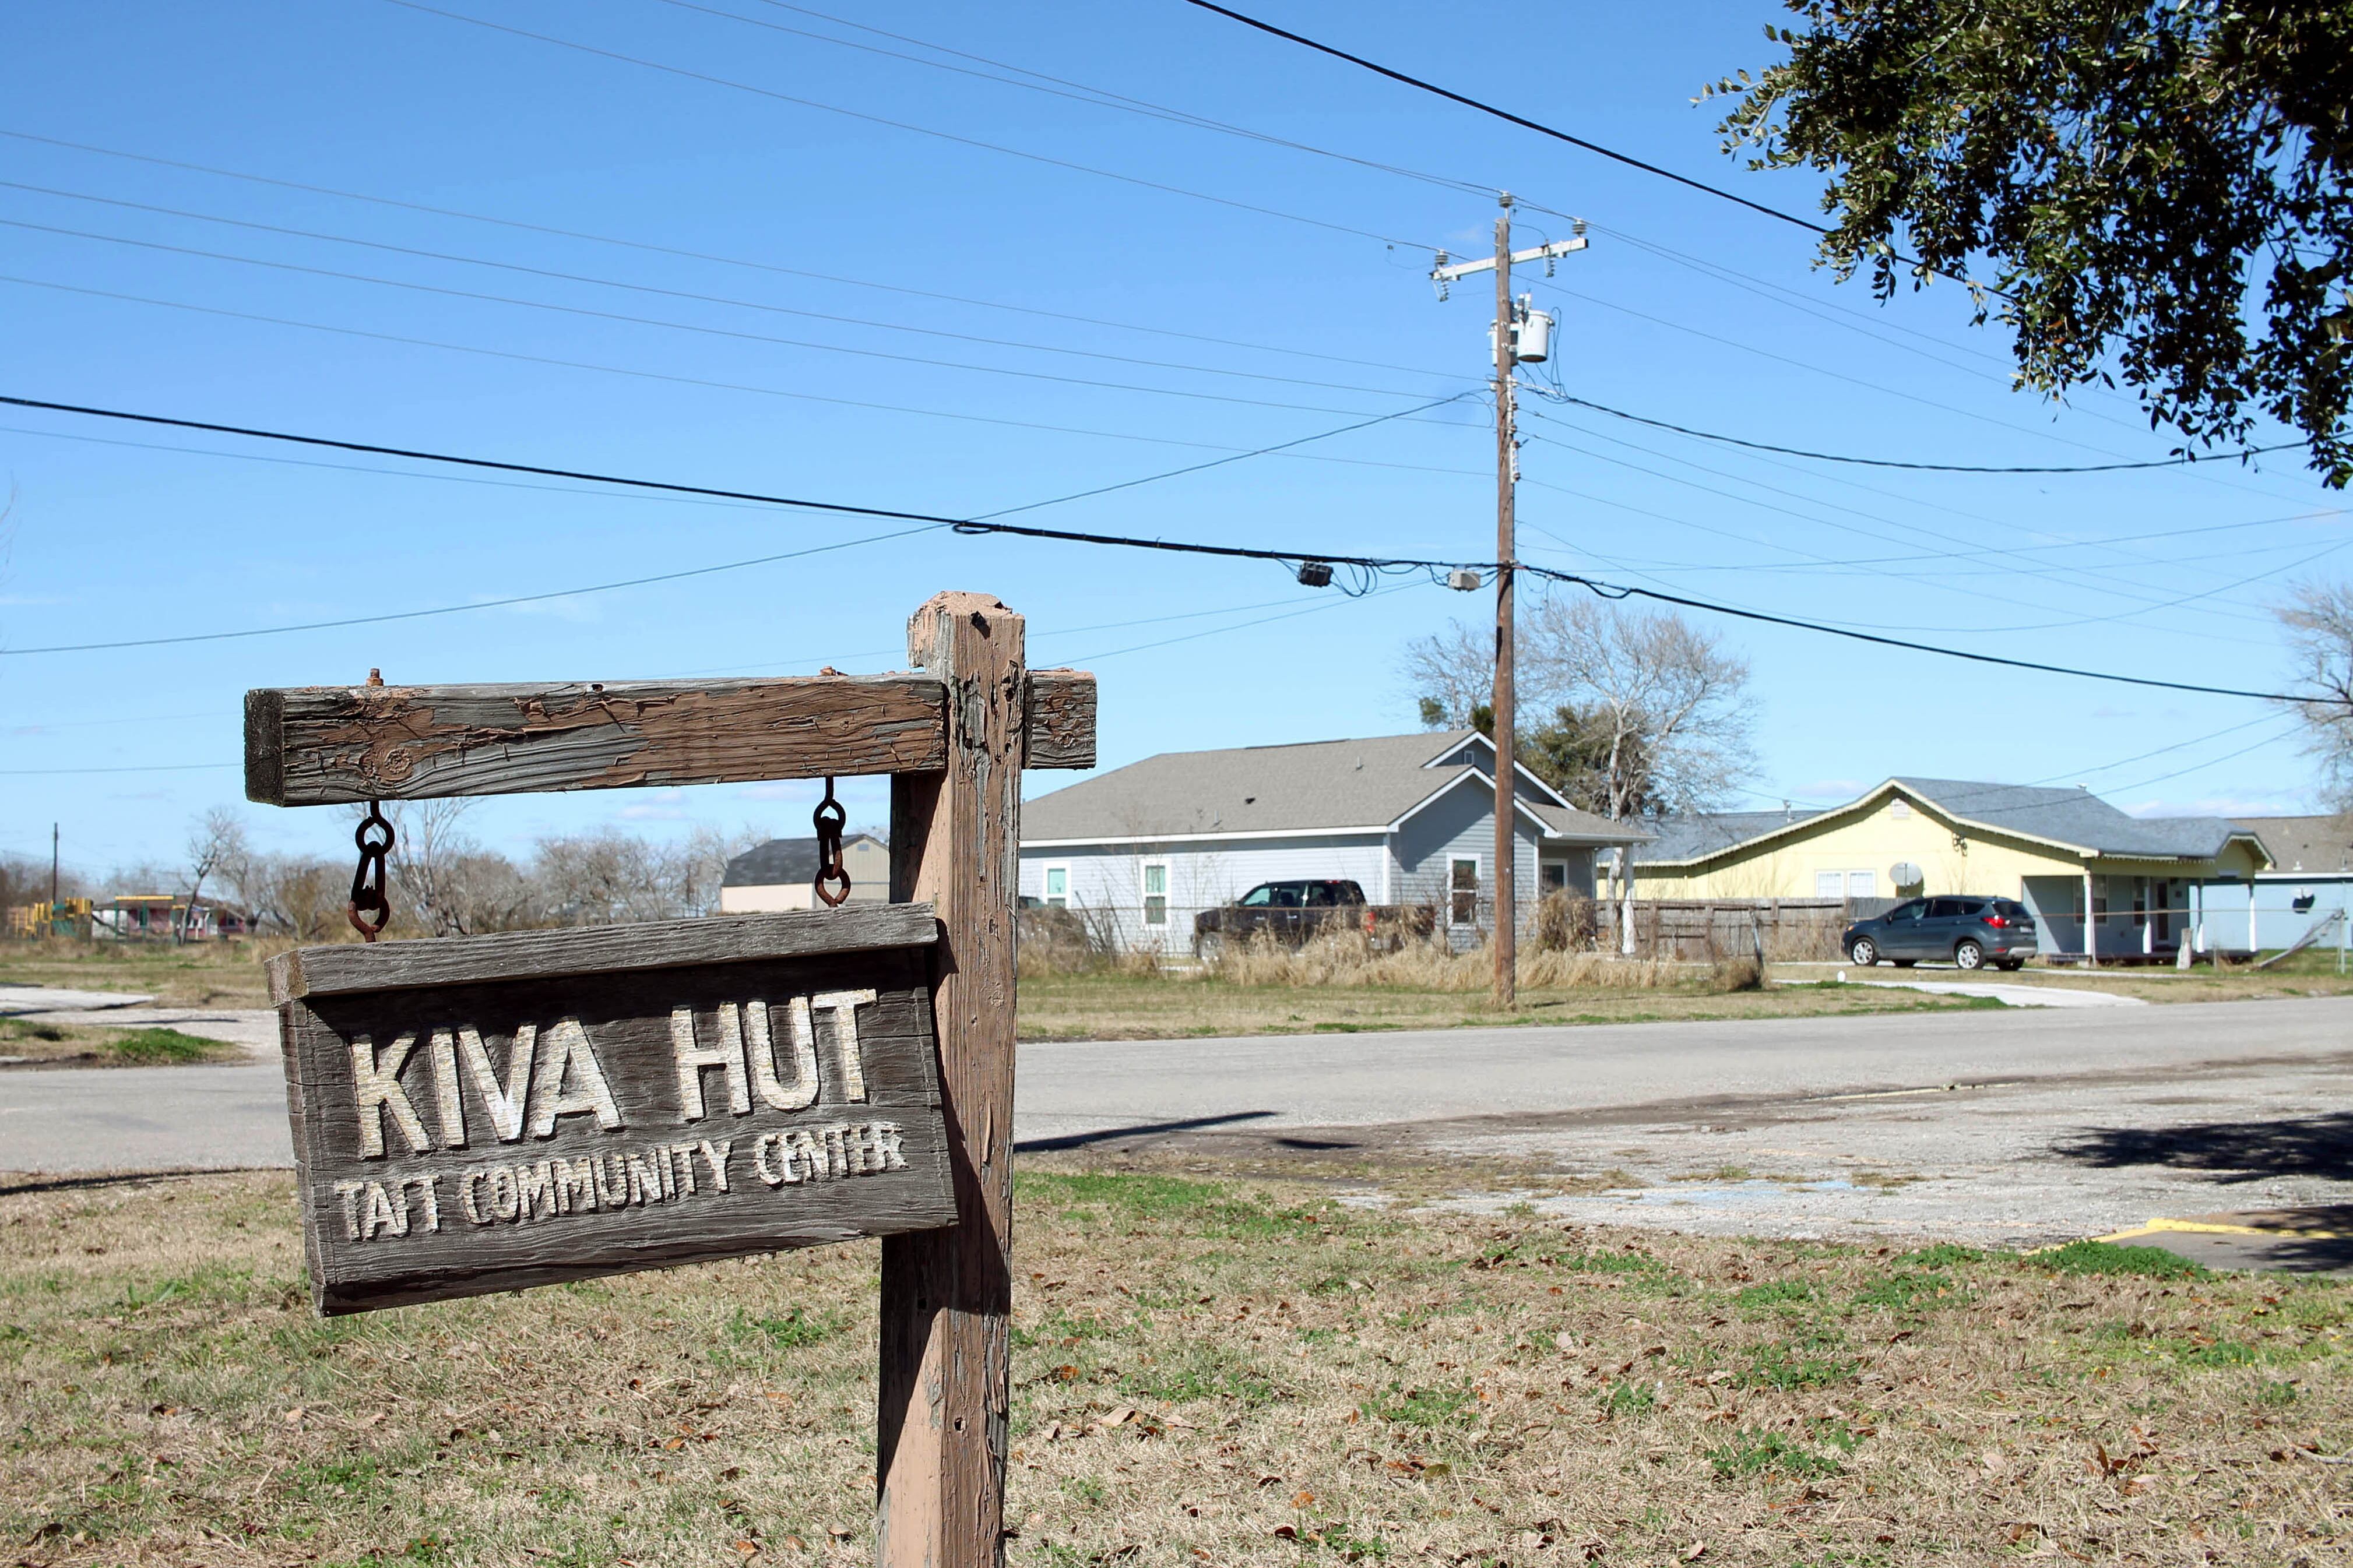 A wooden sign that says "Kiva Hut" and a telephone pole and a house in the background.